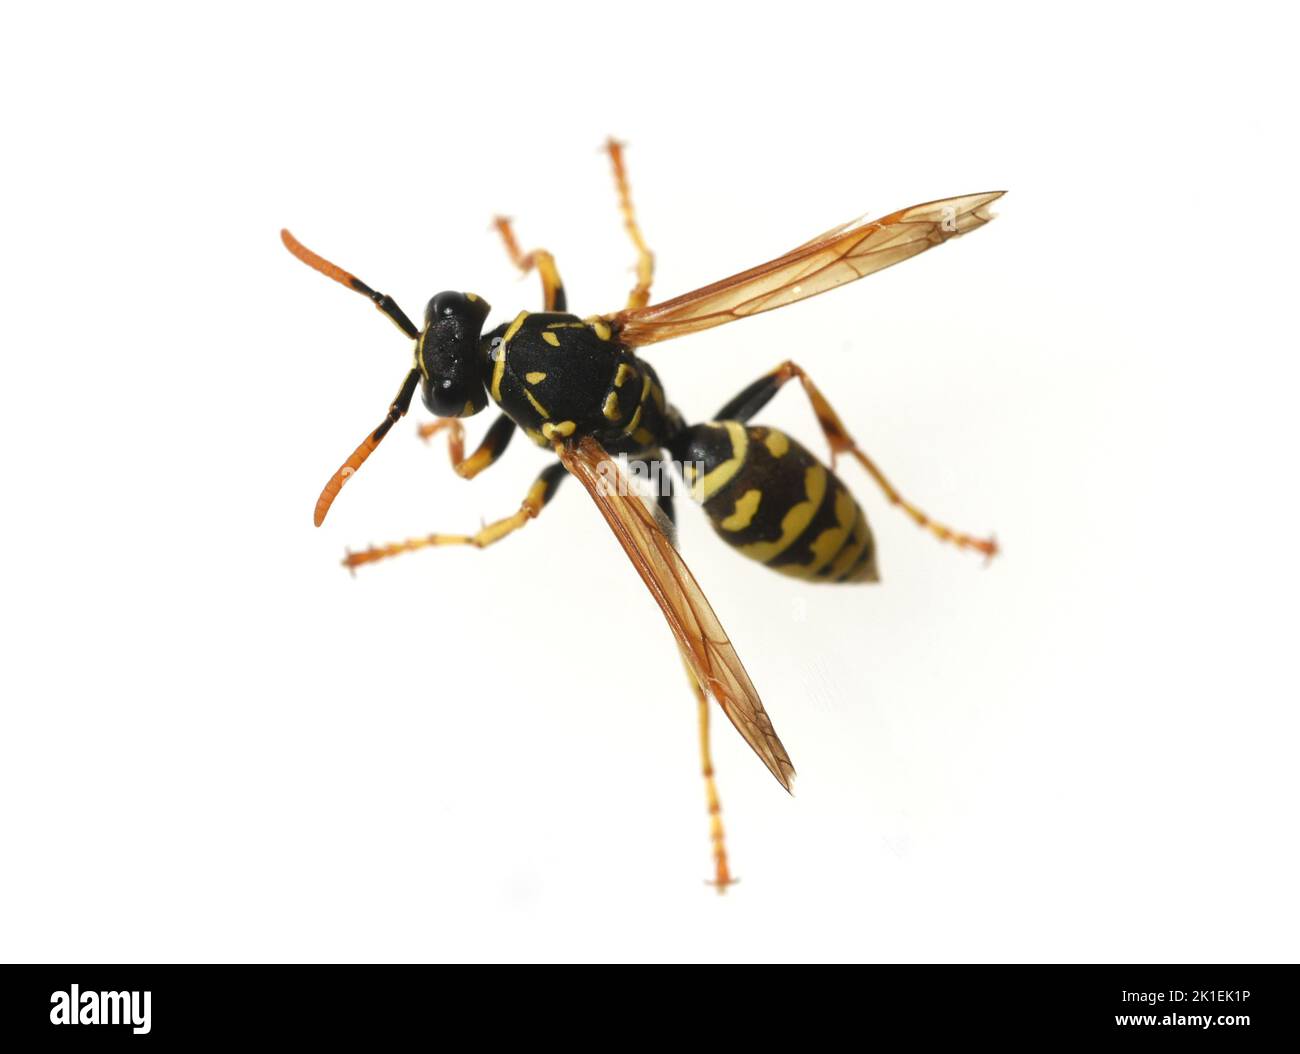 Wasp, Vespula germanica, is a useful and protected insect. Stock Photo